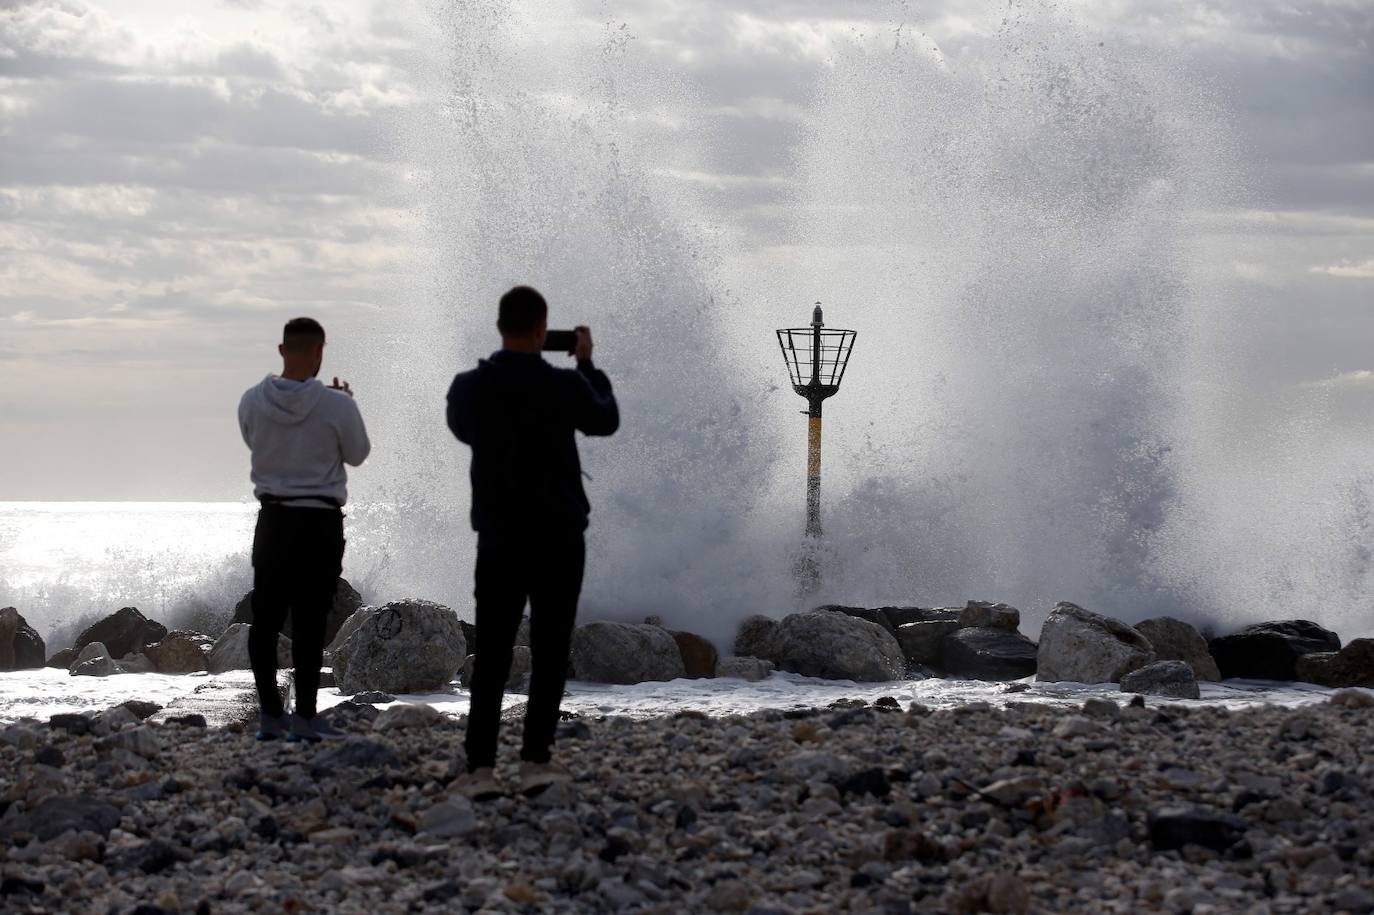 The coast's beaches are pounded by storms - in pictures